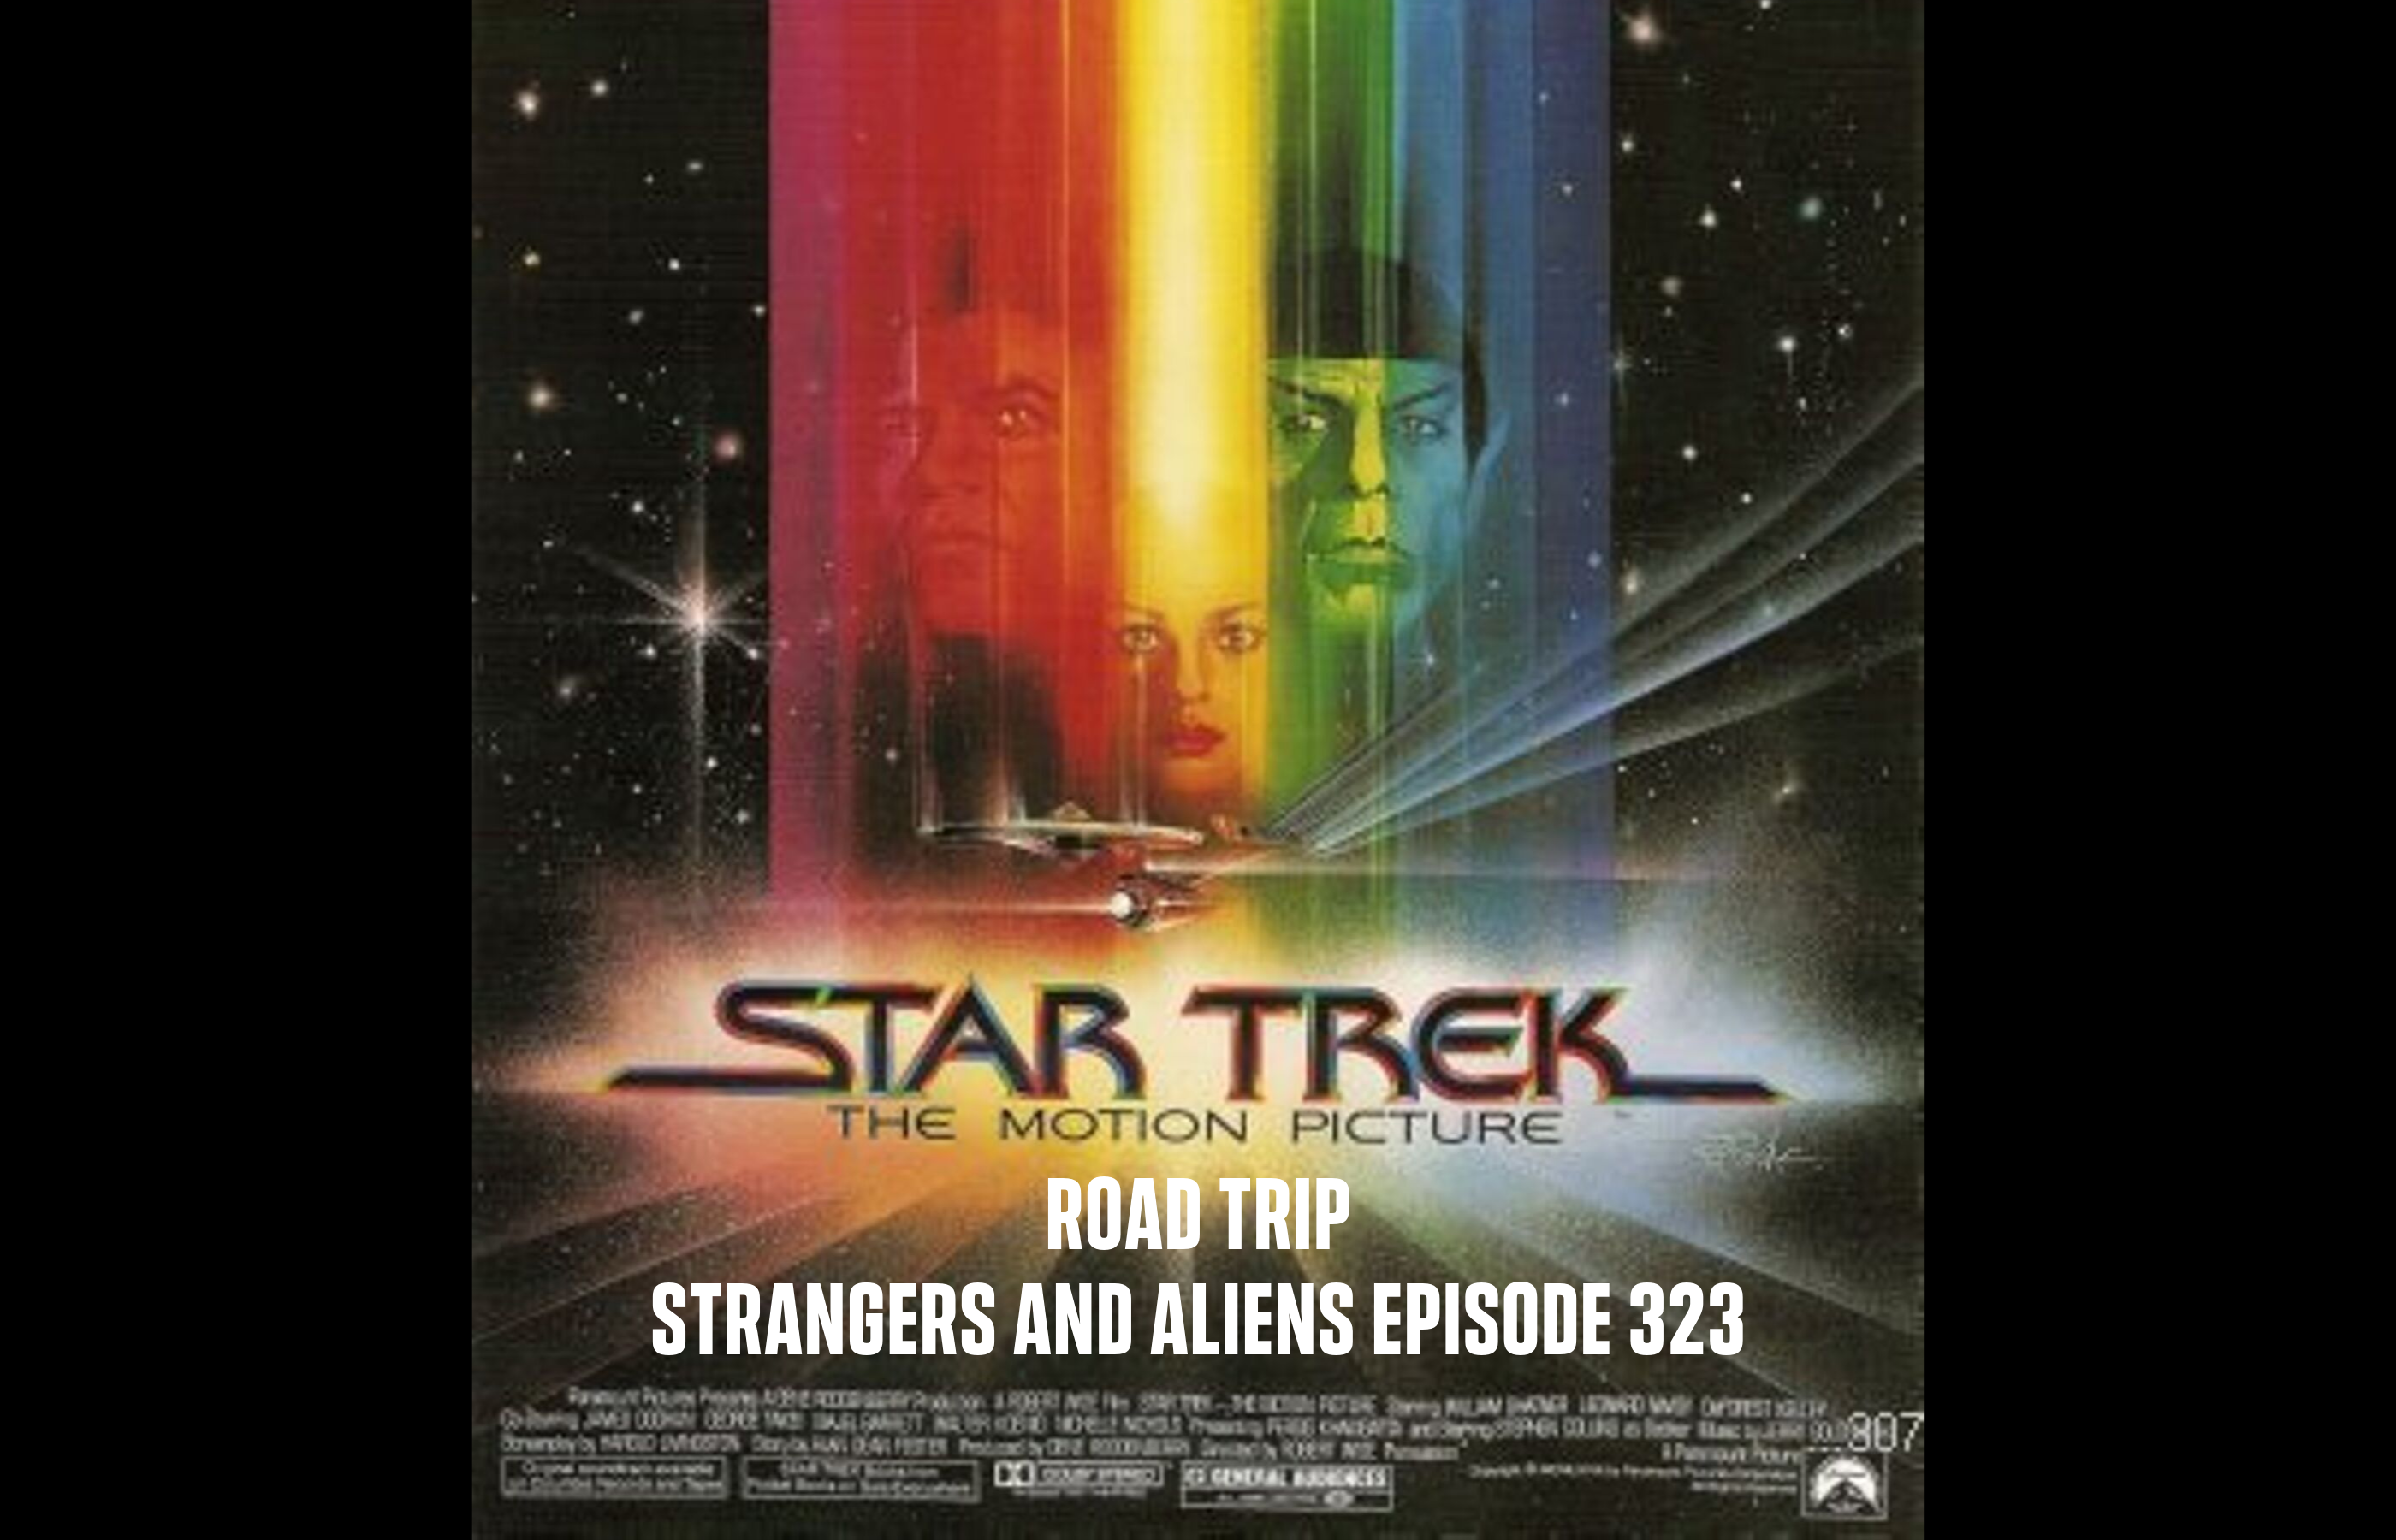 STAR TREK THE MOTION PICTURE Road Trip – SA323